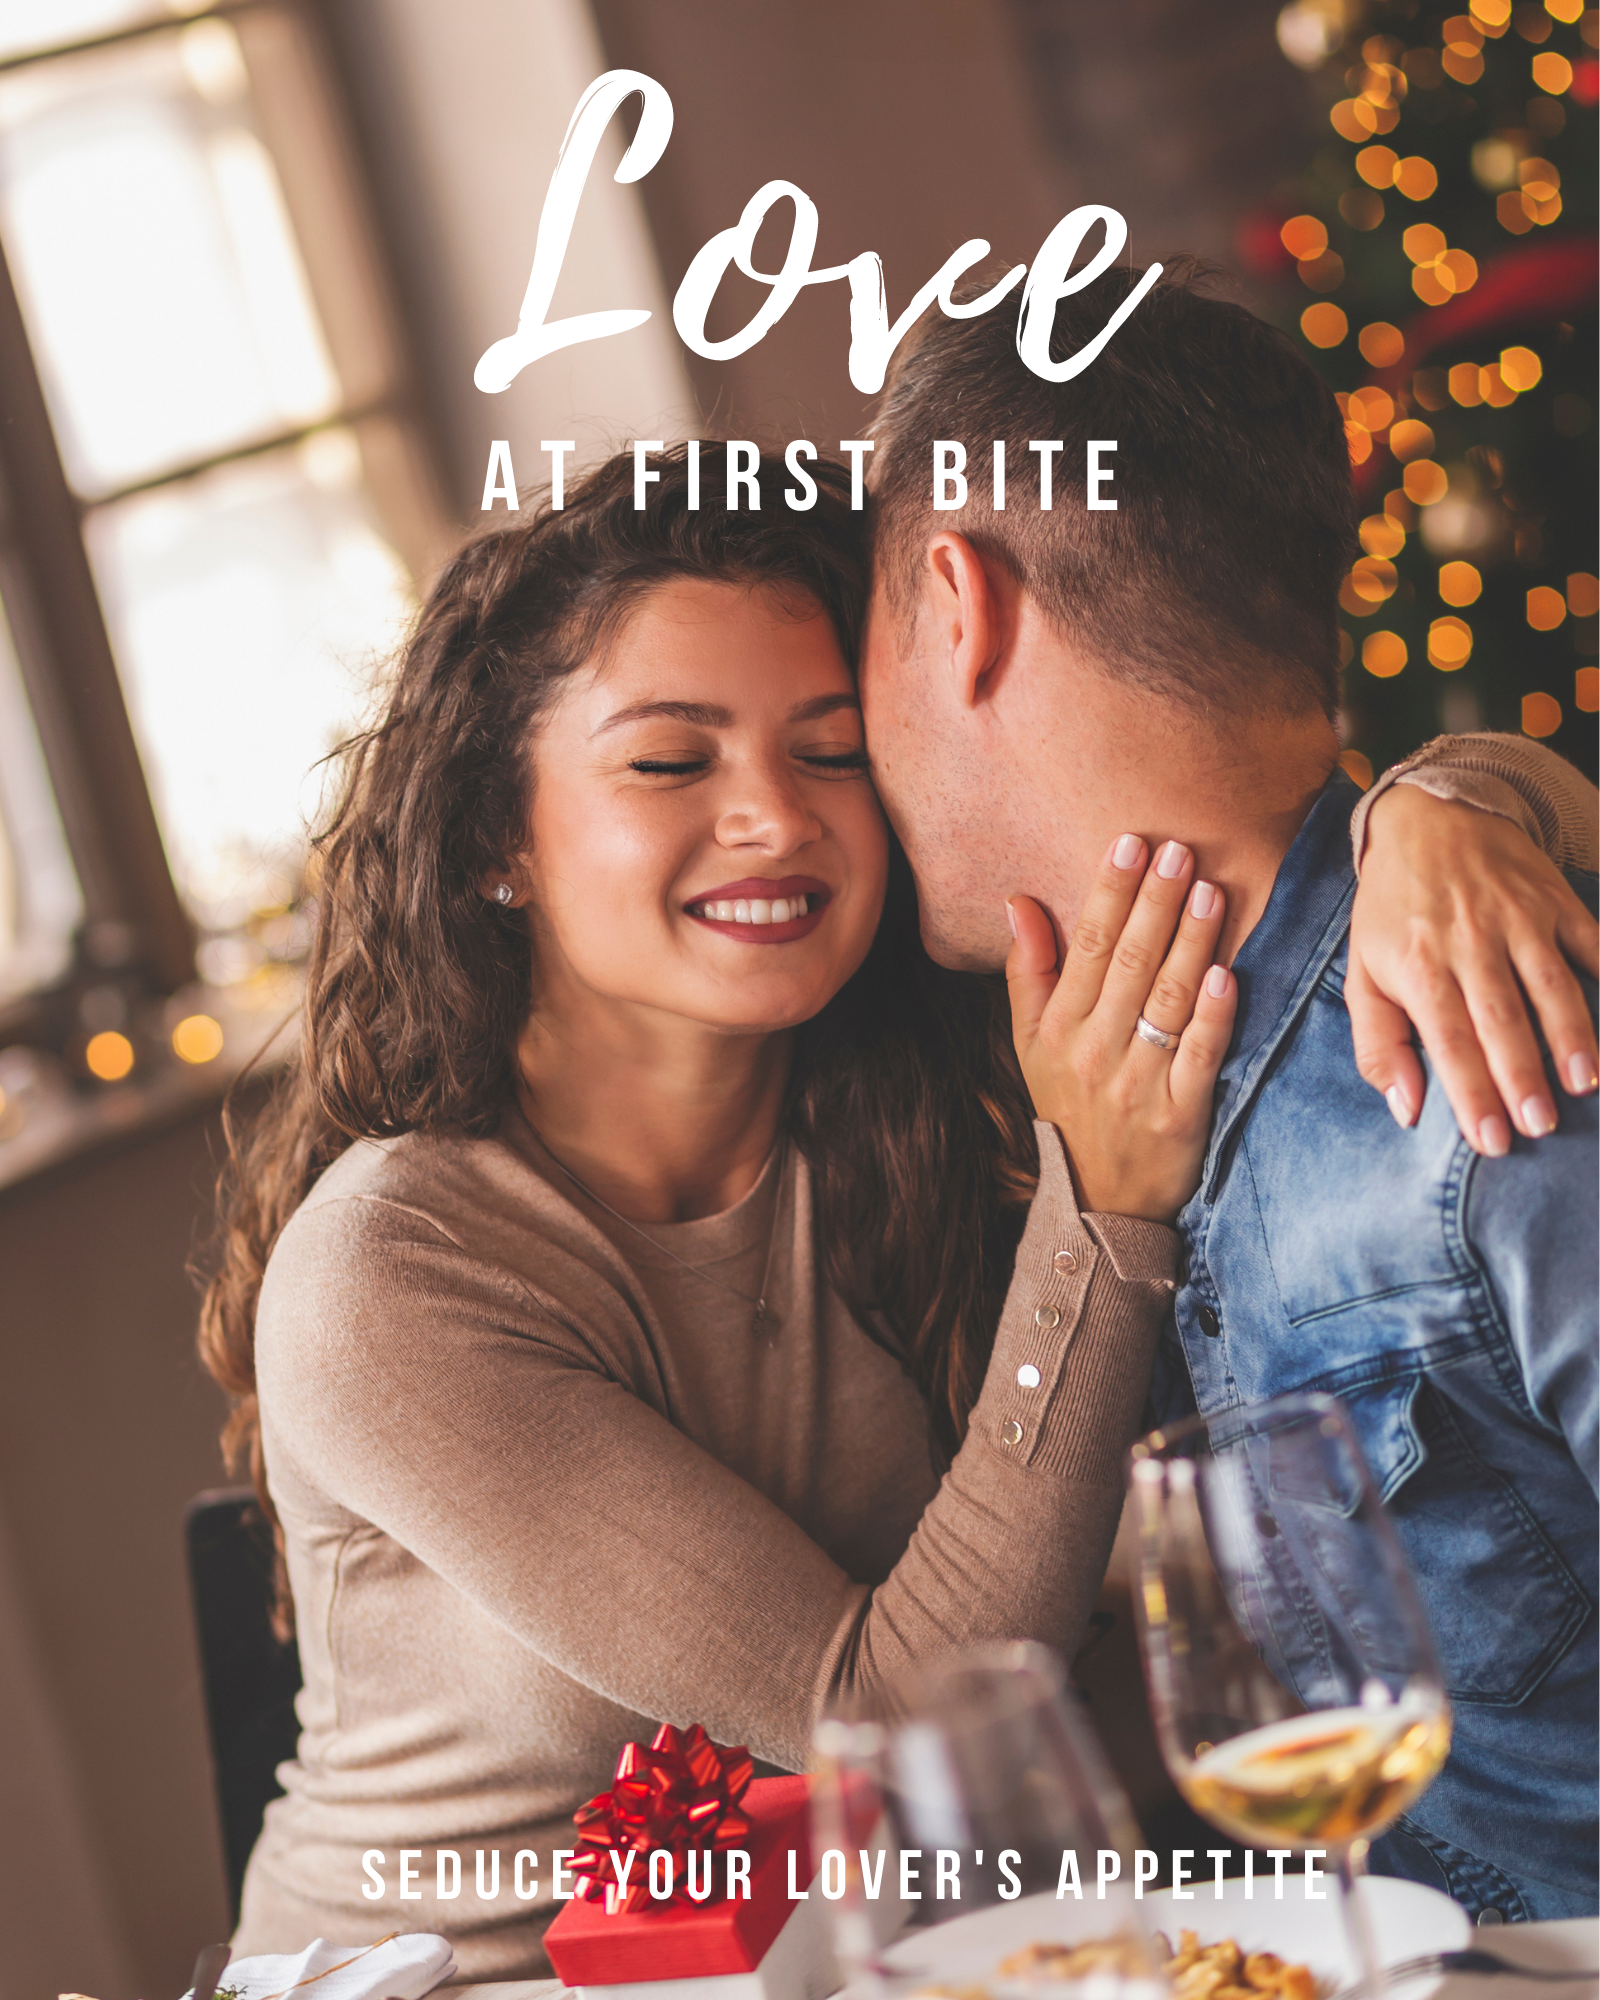 Fresh: Love at First Bite. Dating in the modern world can often be